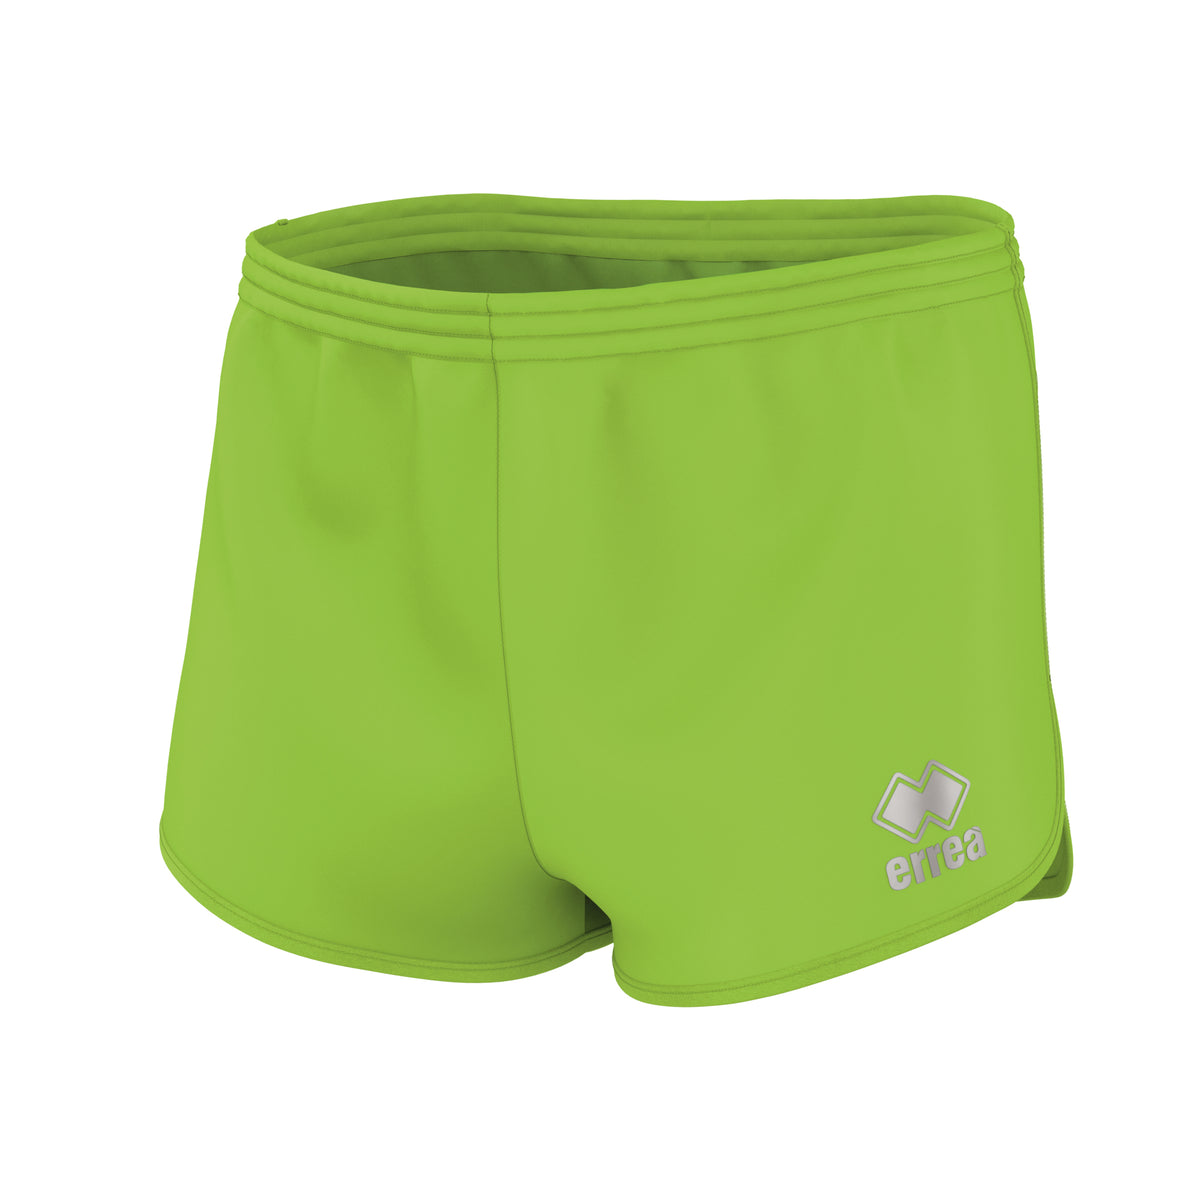 Meyer Shorts in Adult